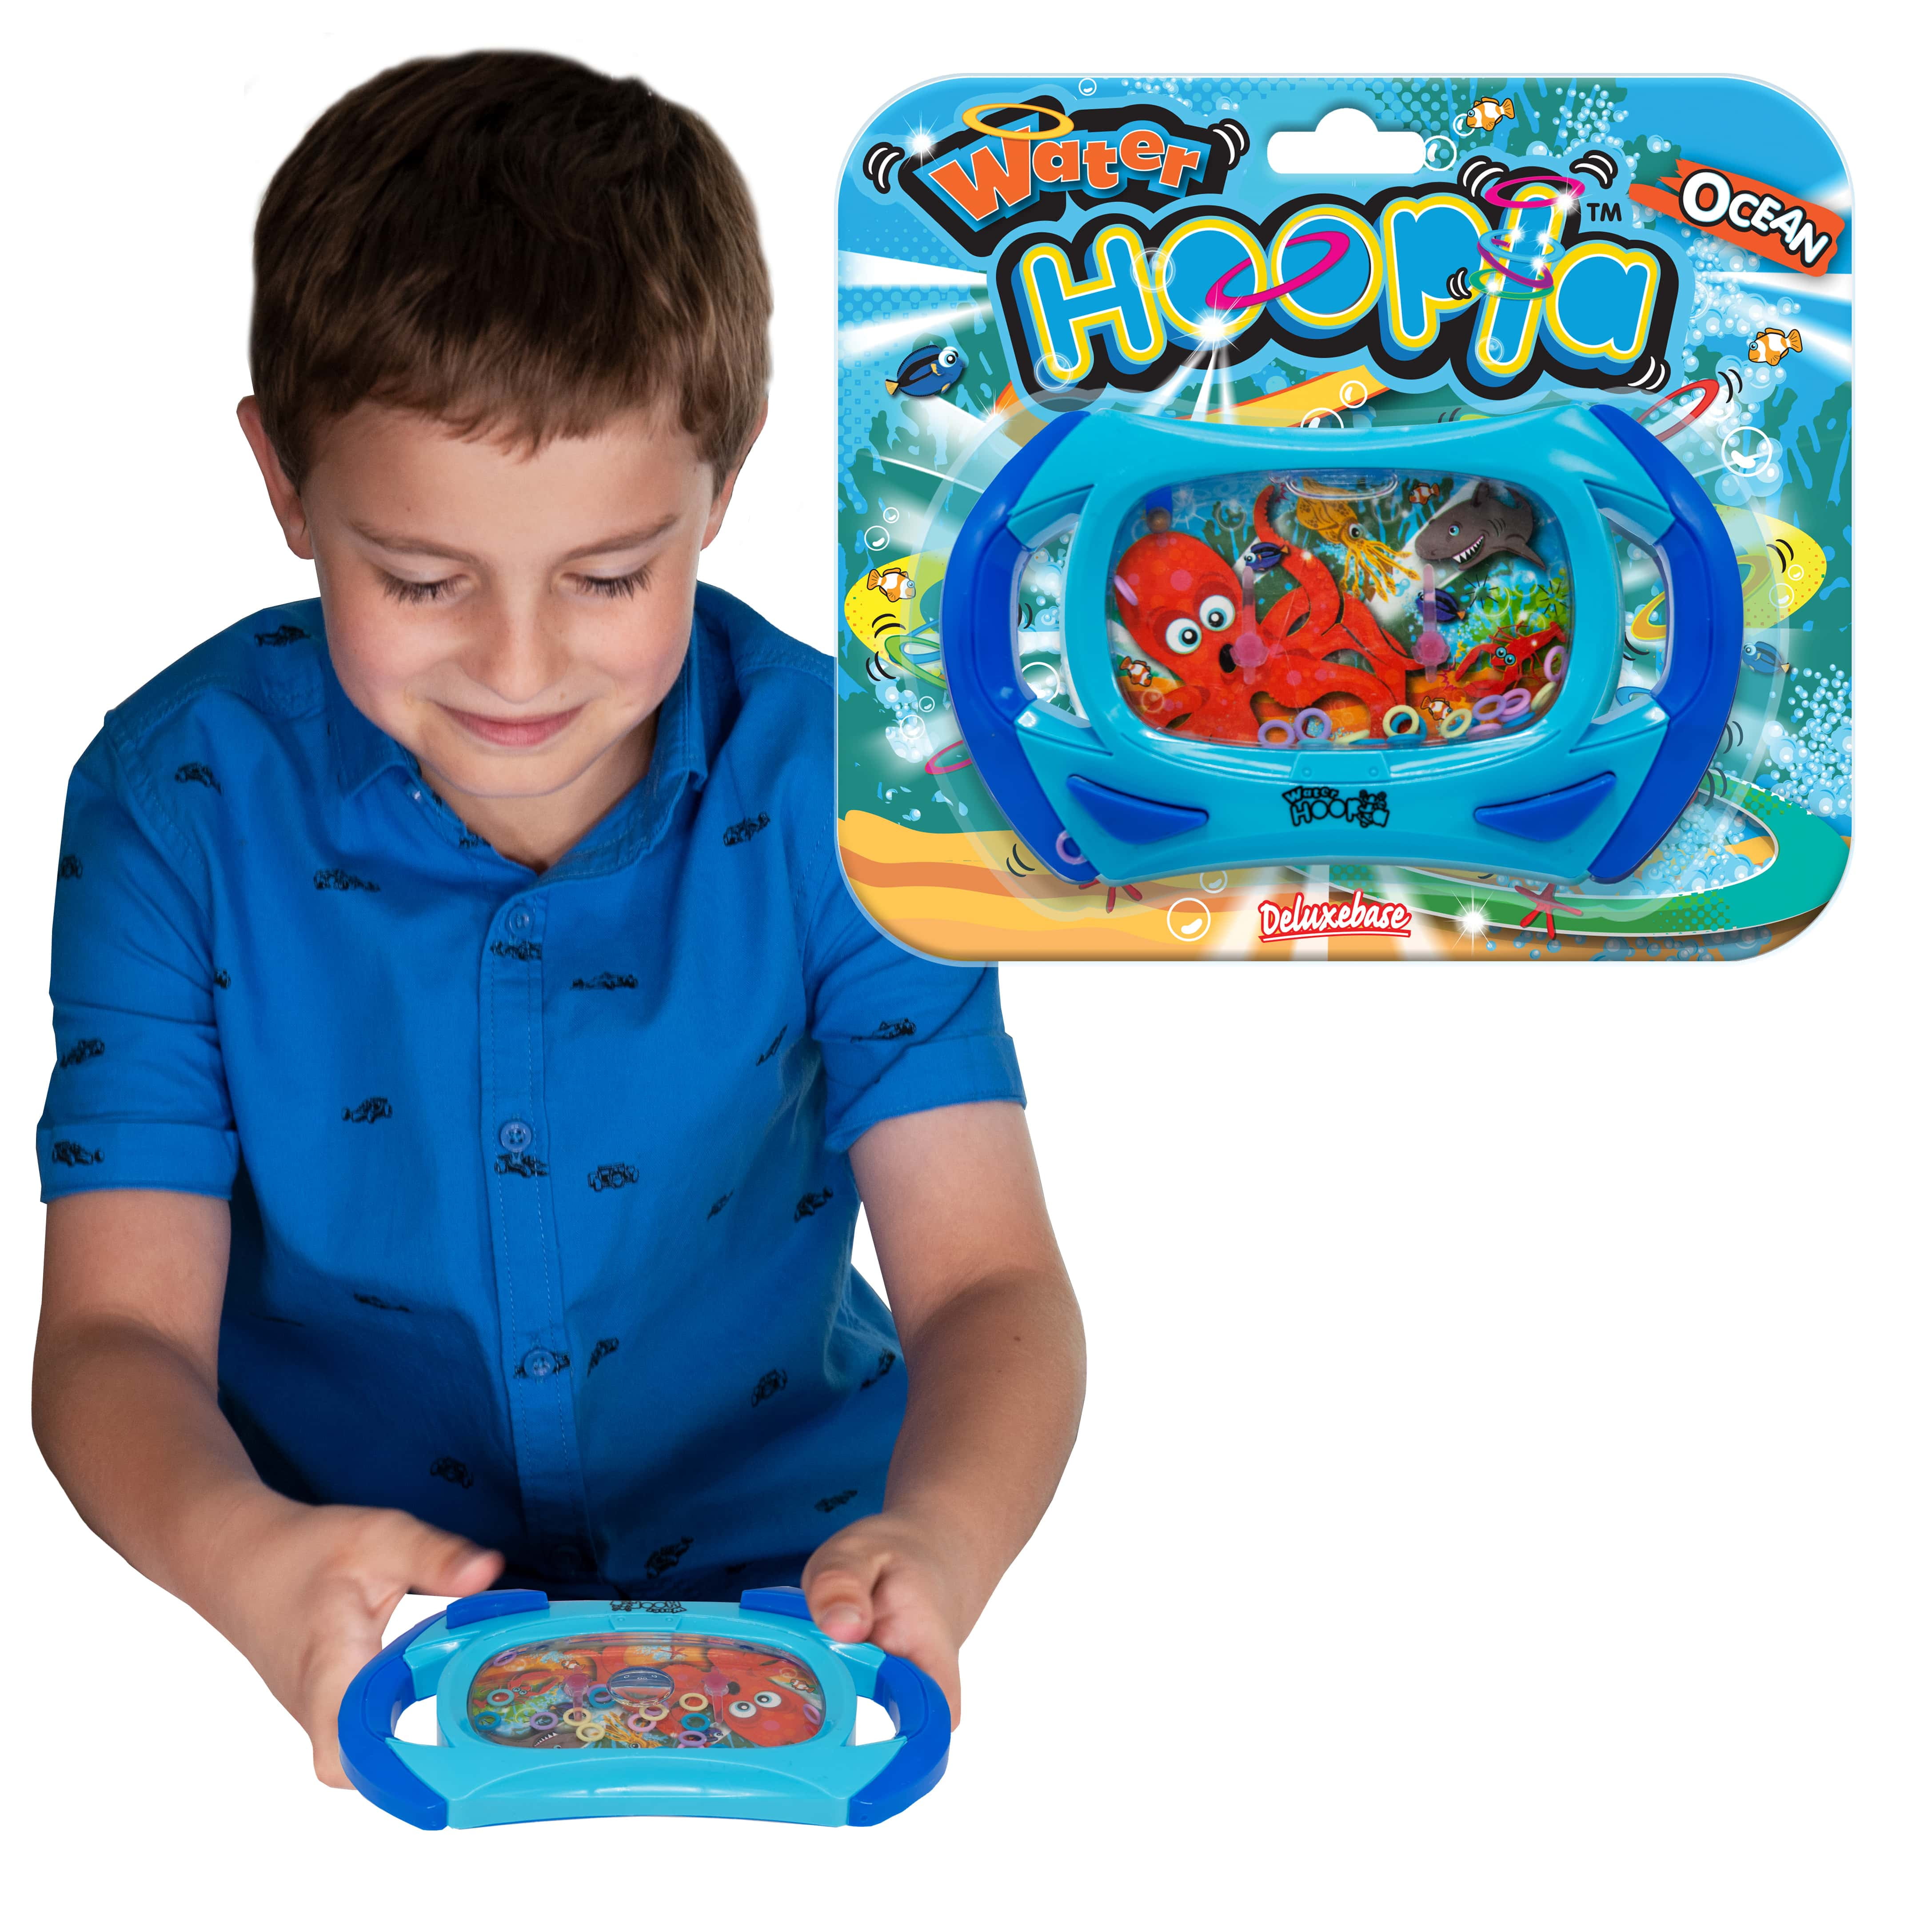 CLASSICPUZZLE ADD WATER TO PLAY KIDS FUN NICORN Playing Game UK Details about   WATER GAME 